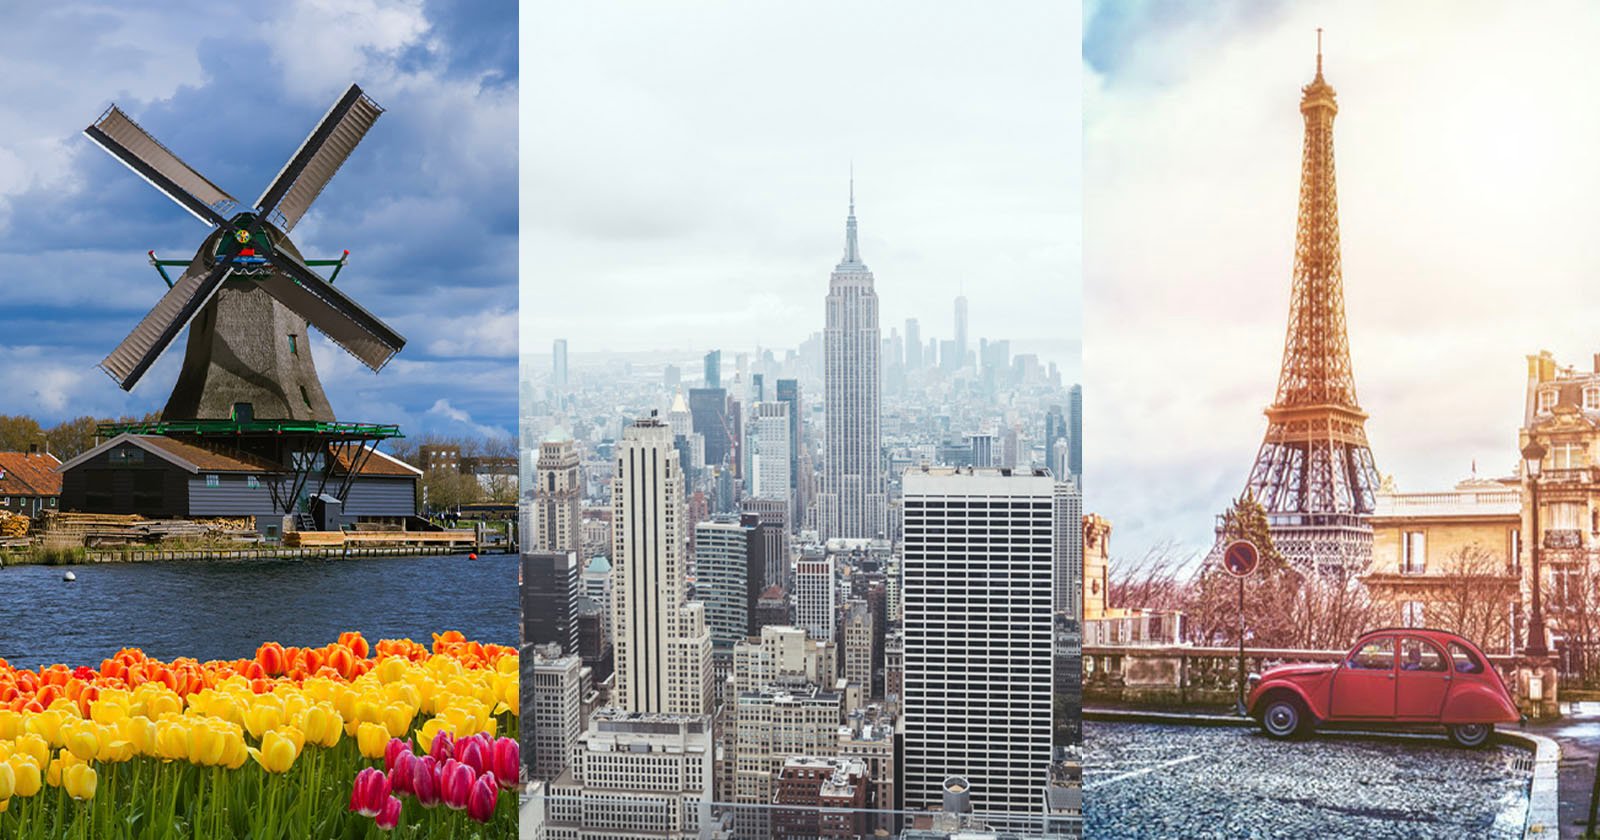 These Countries Pay the Most for Photography, According to a Study